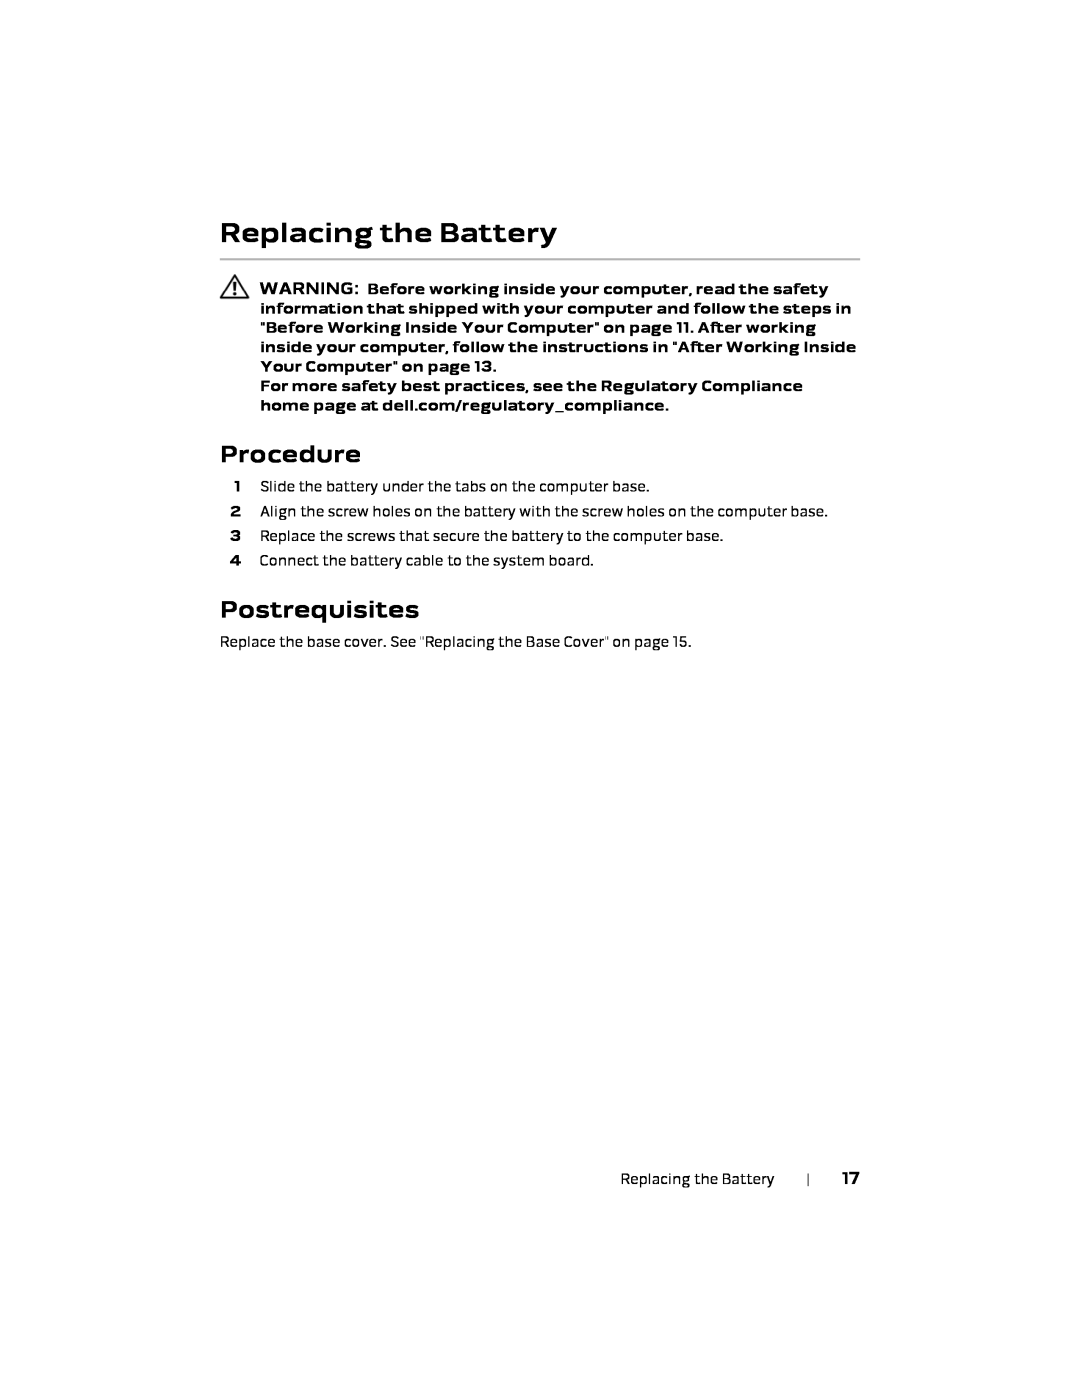 Alienware 17 R1, P18E owner manual Replacing the Battery, Postrequisites, Procedure 